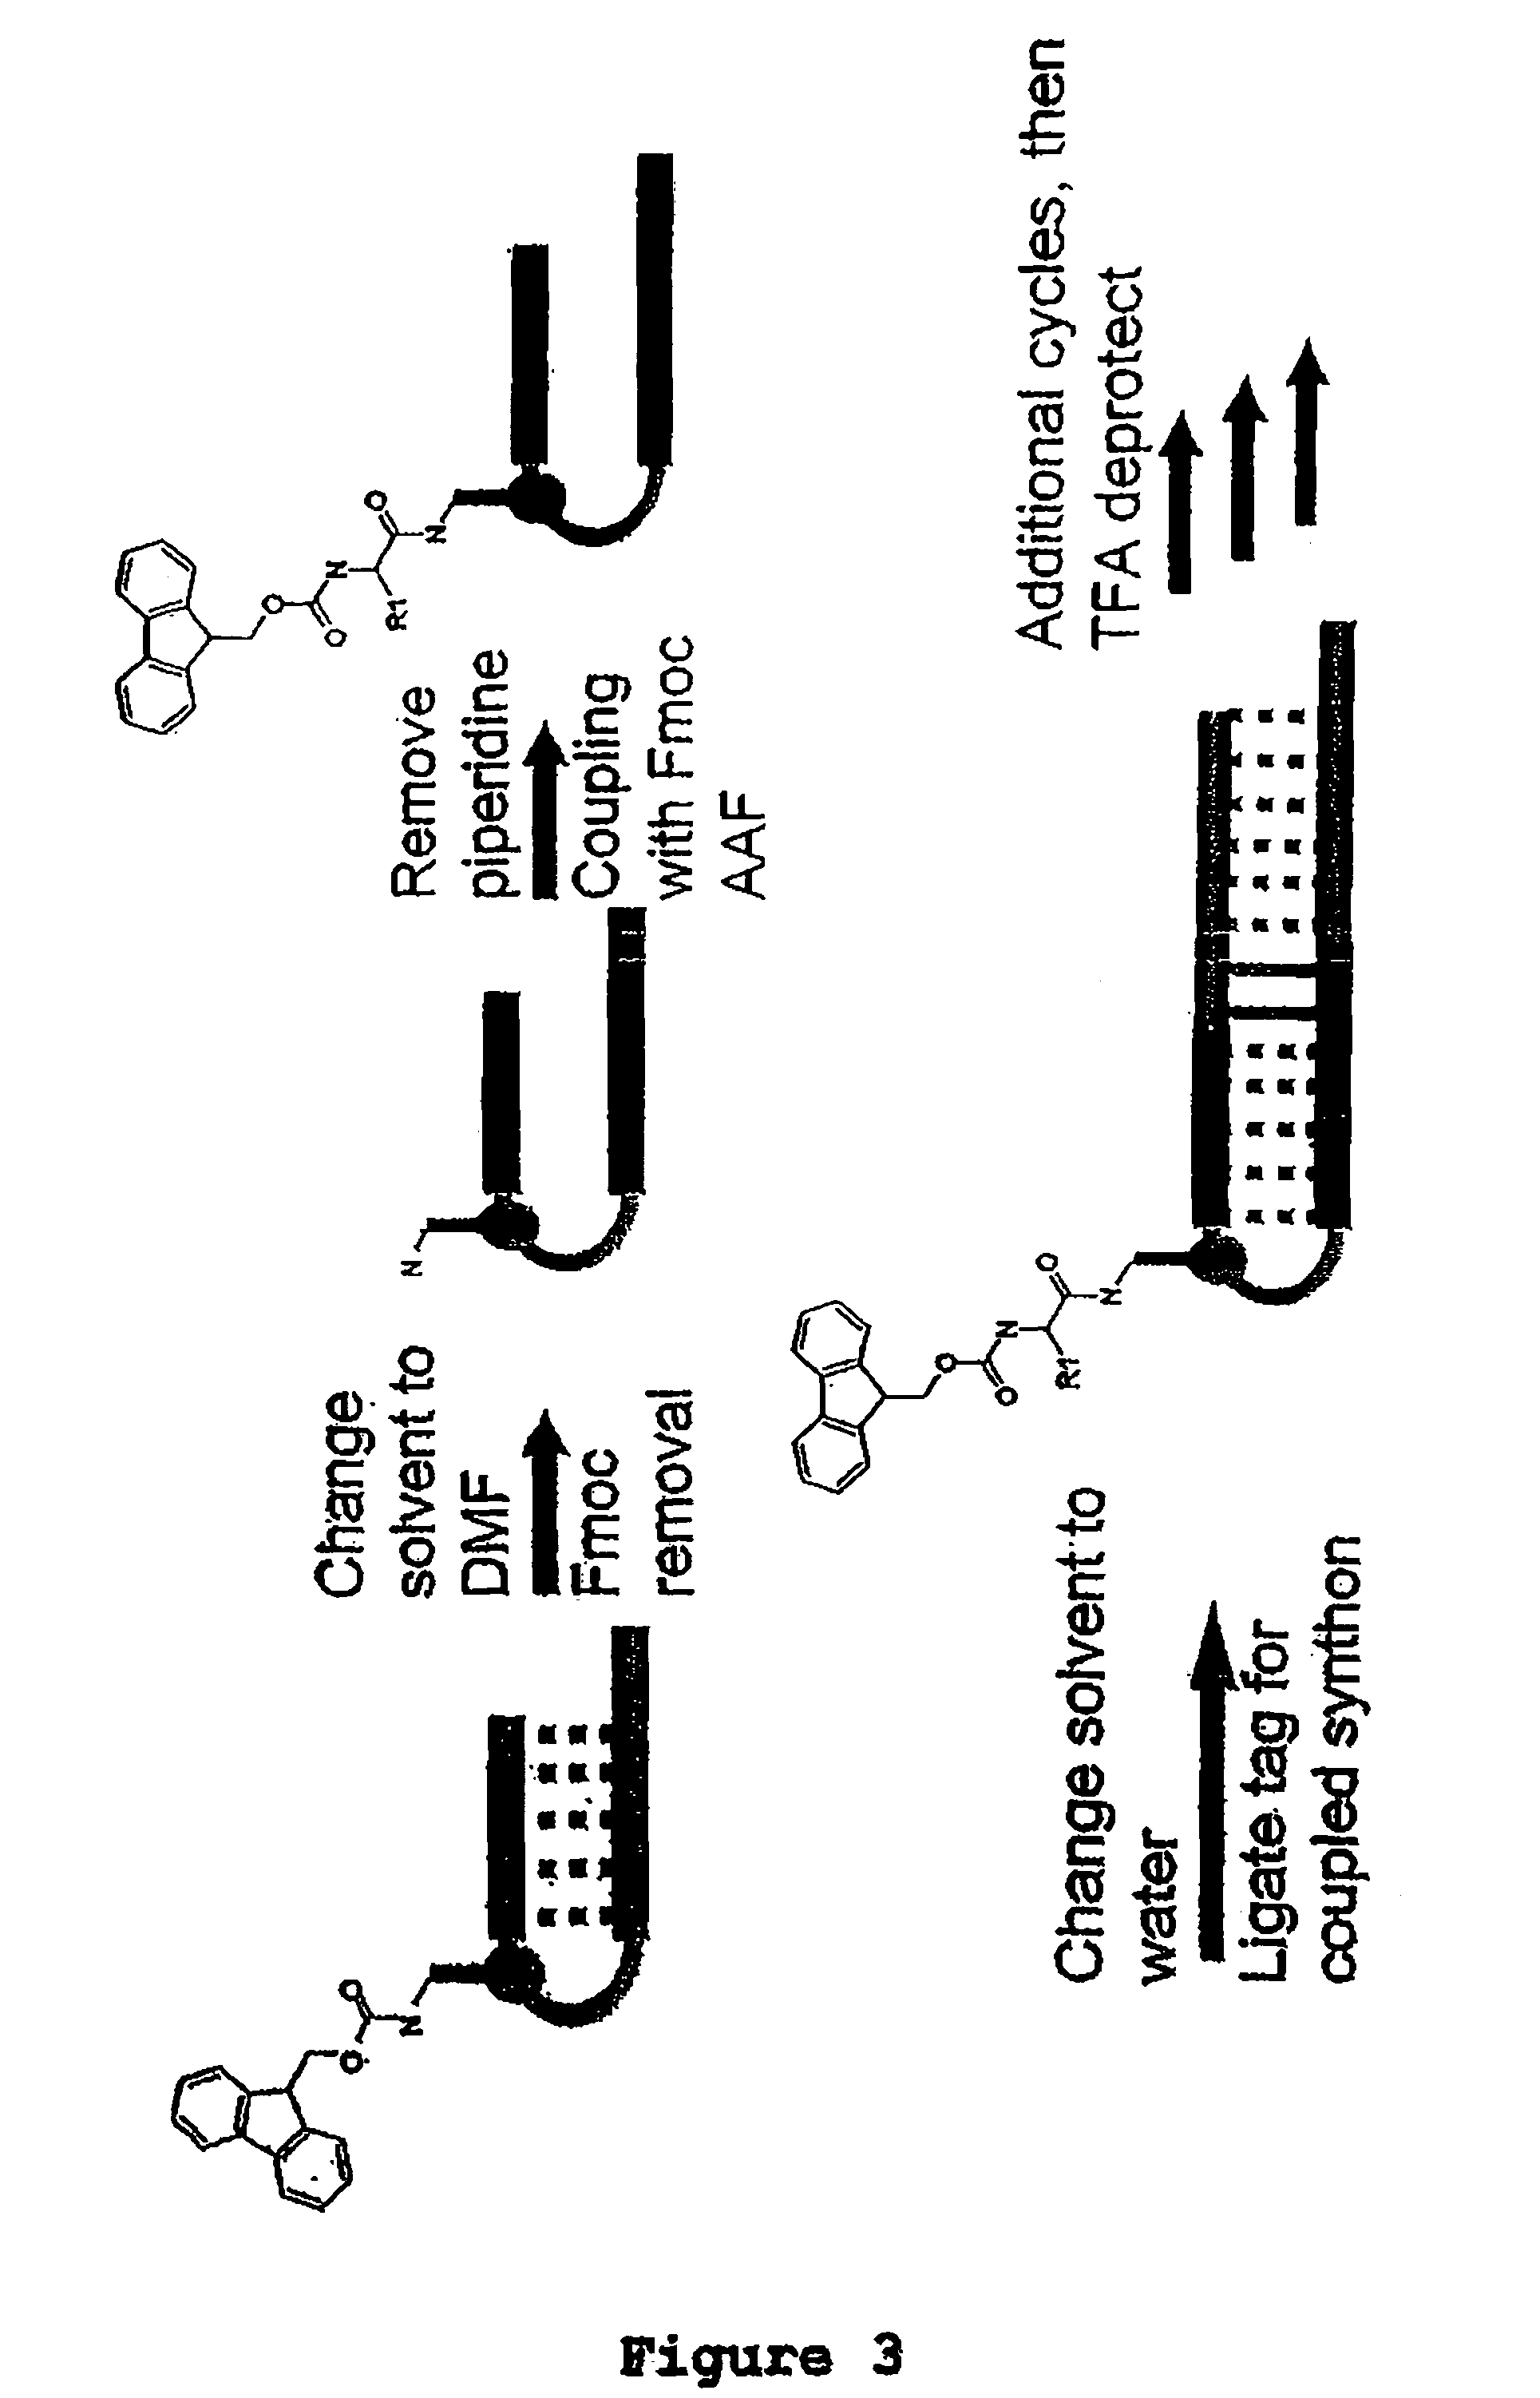 Methods for synthesis of encoded libraries